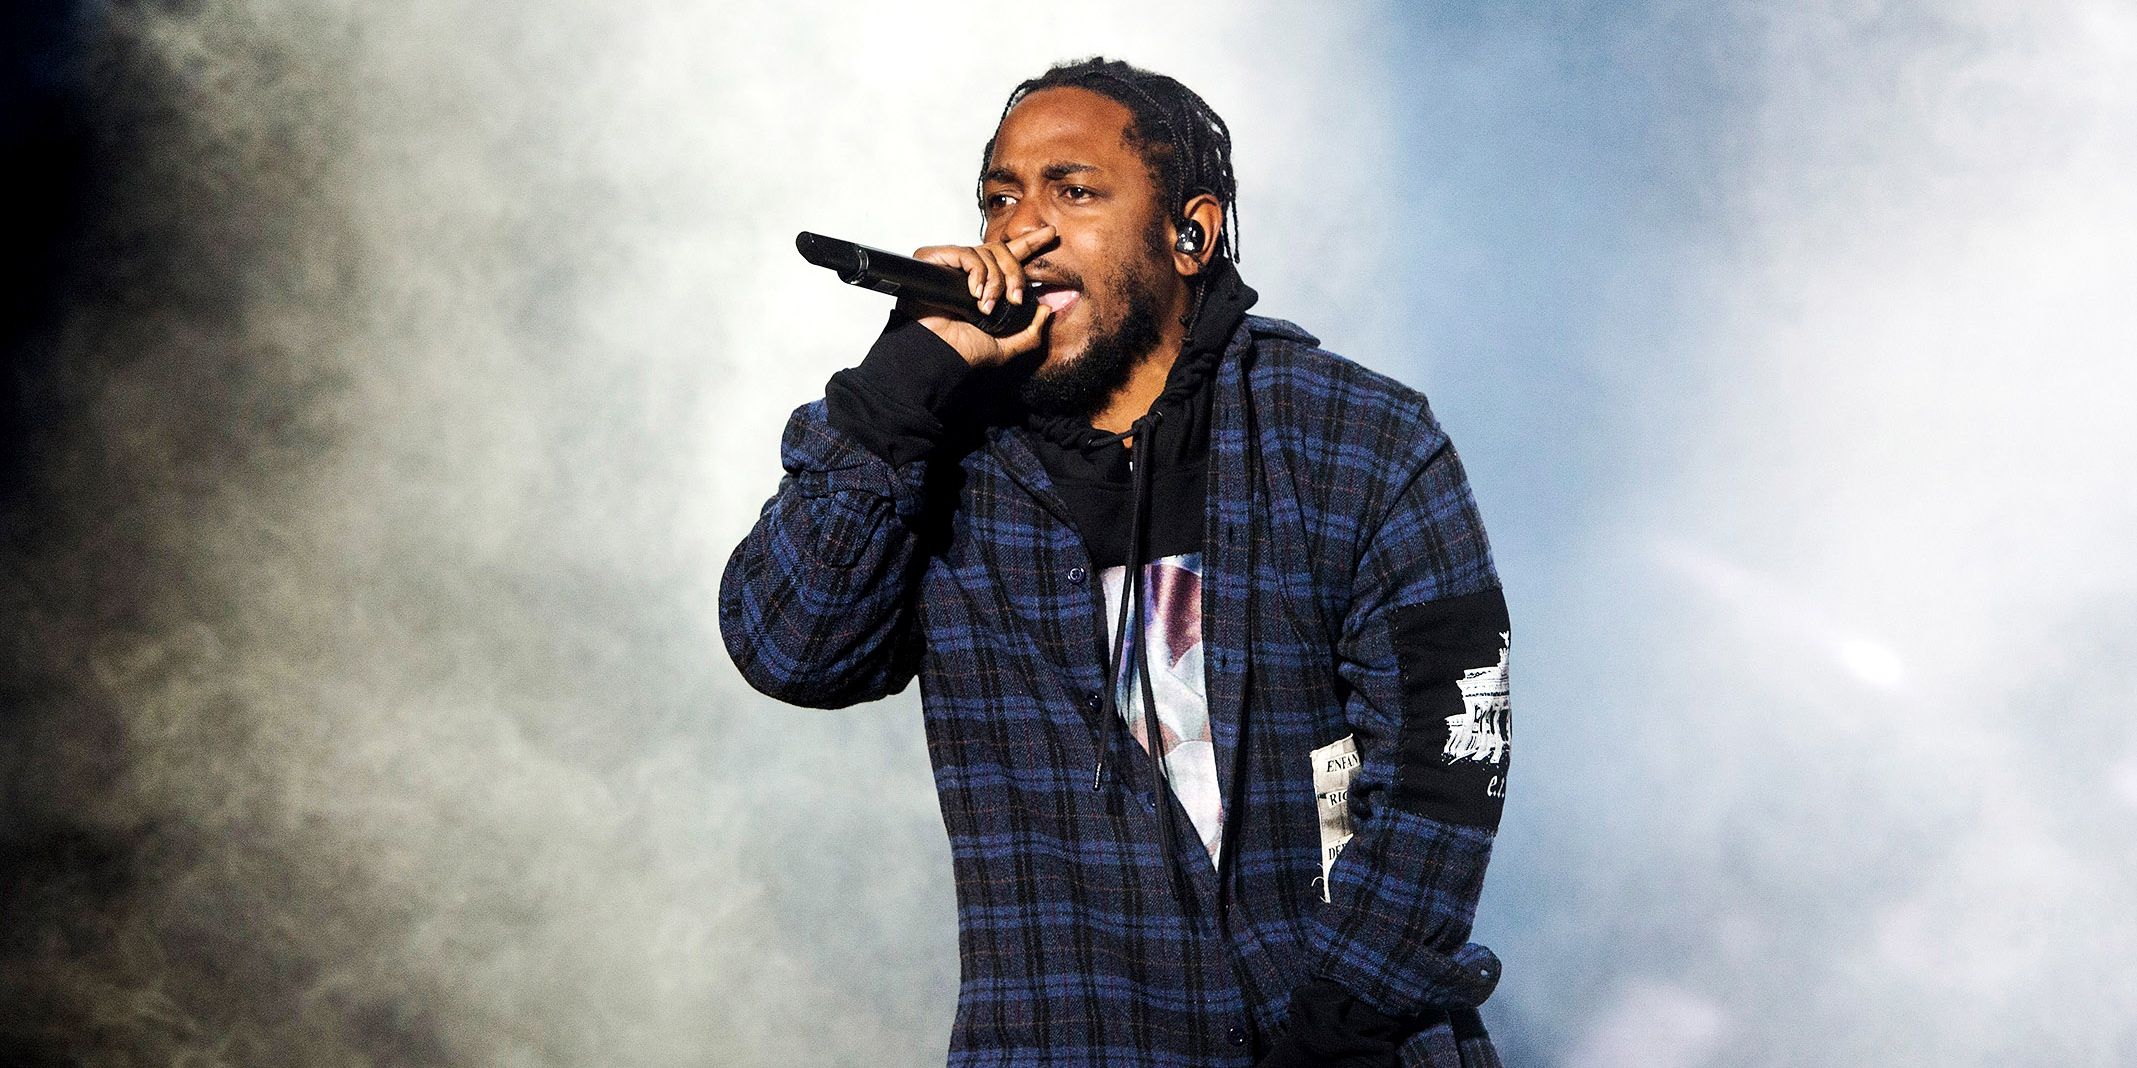 Watch Kendrick Lamar’s Incredible Grammy 2018 Performance With U2 and